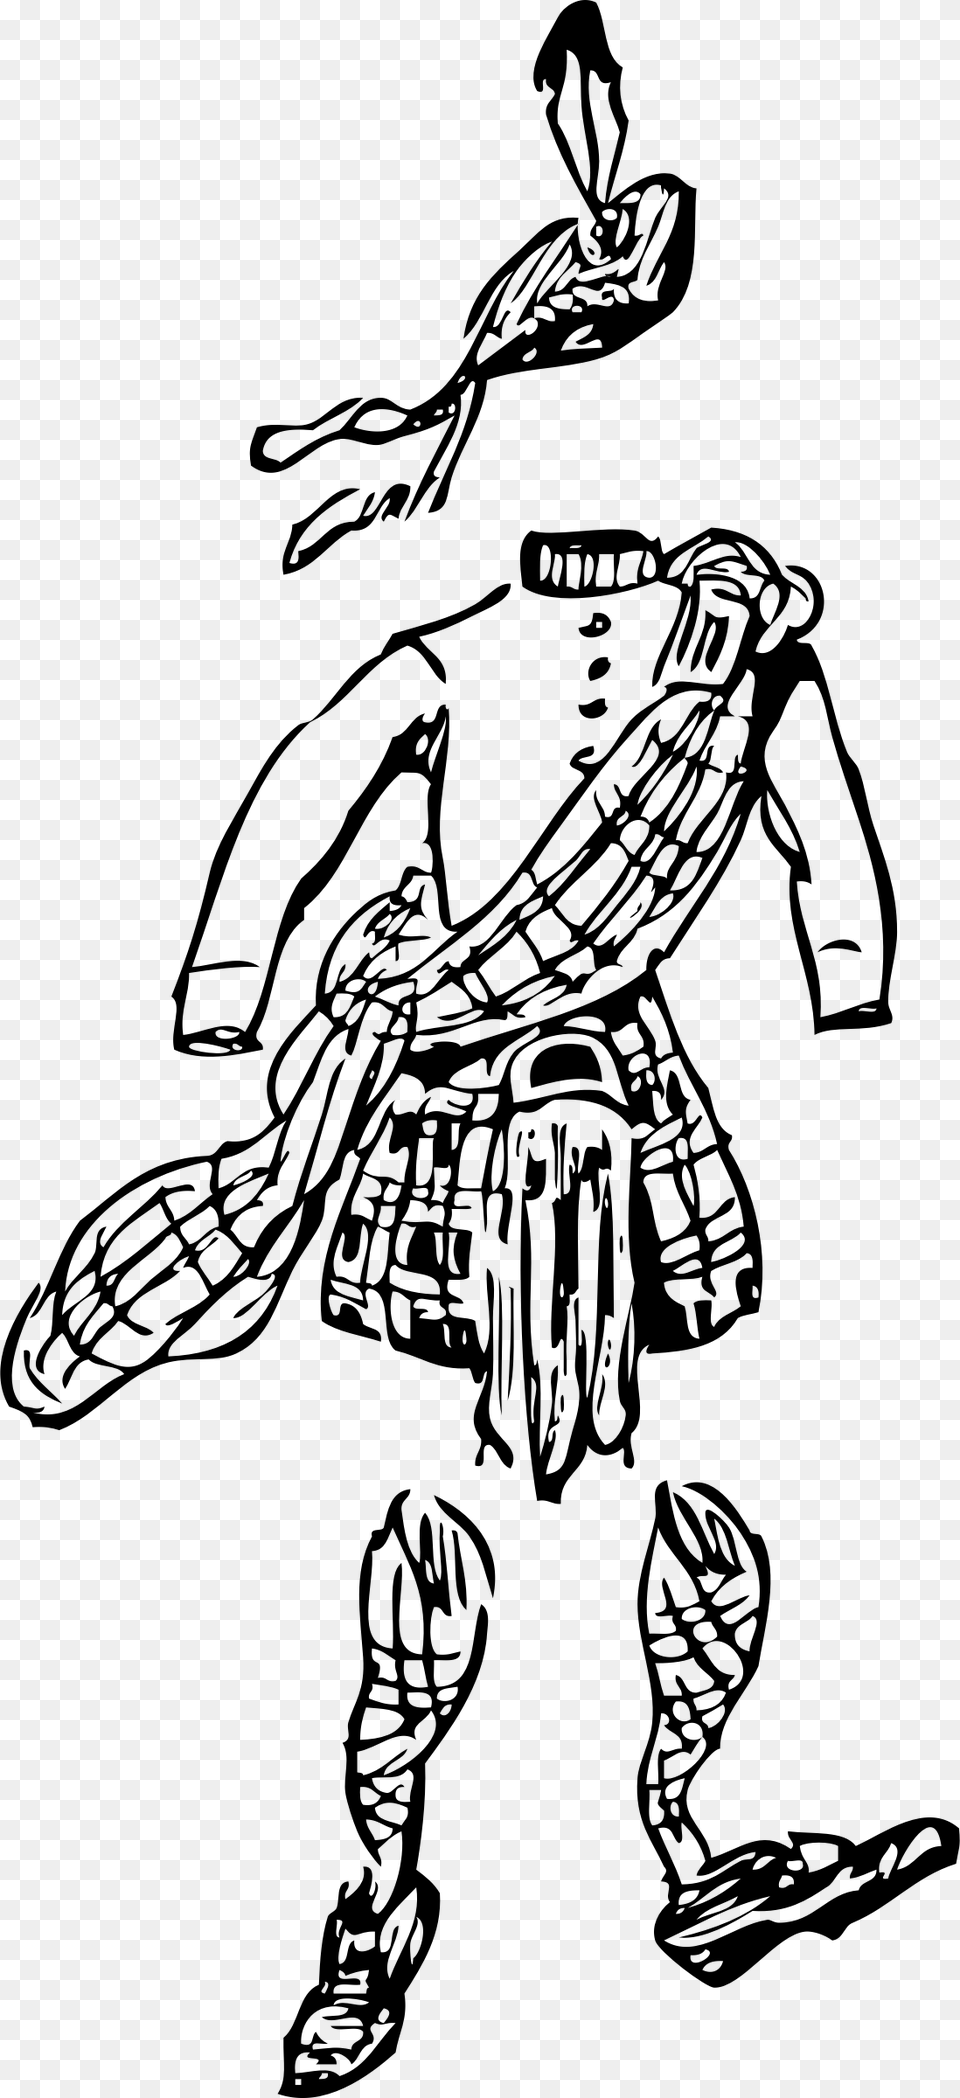 This Icons Design Of Scotsman39s Clothes, Gray Free Png